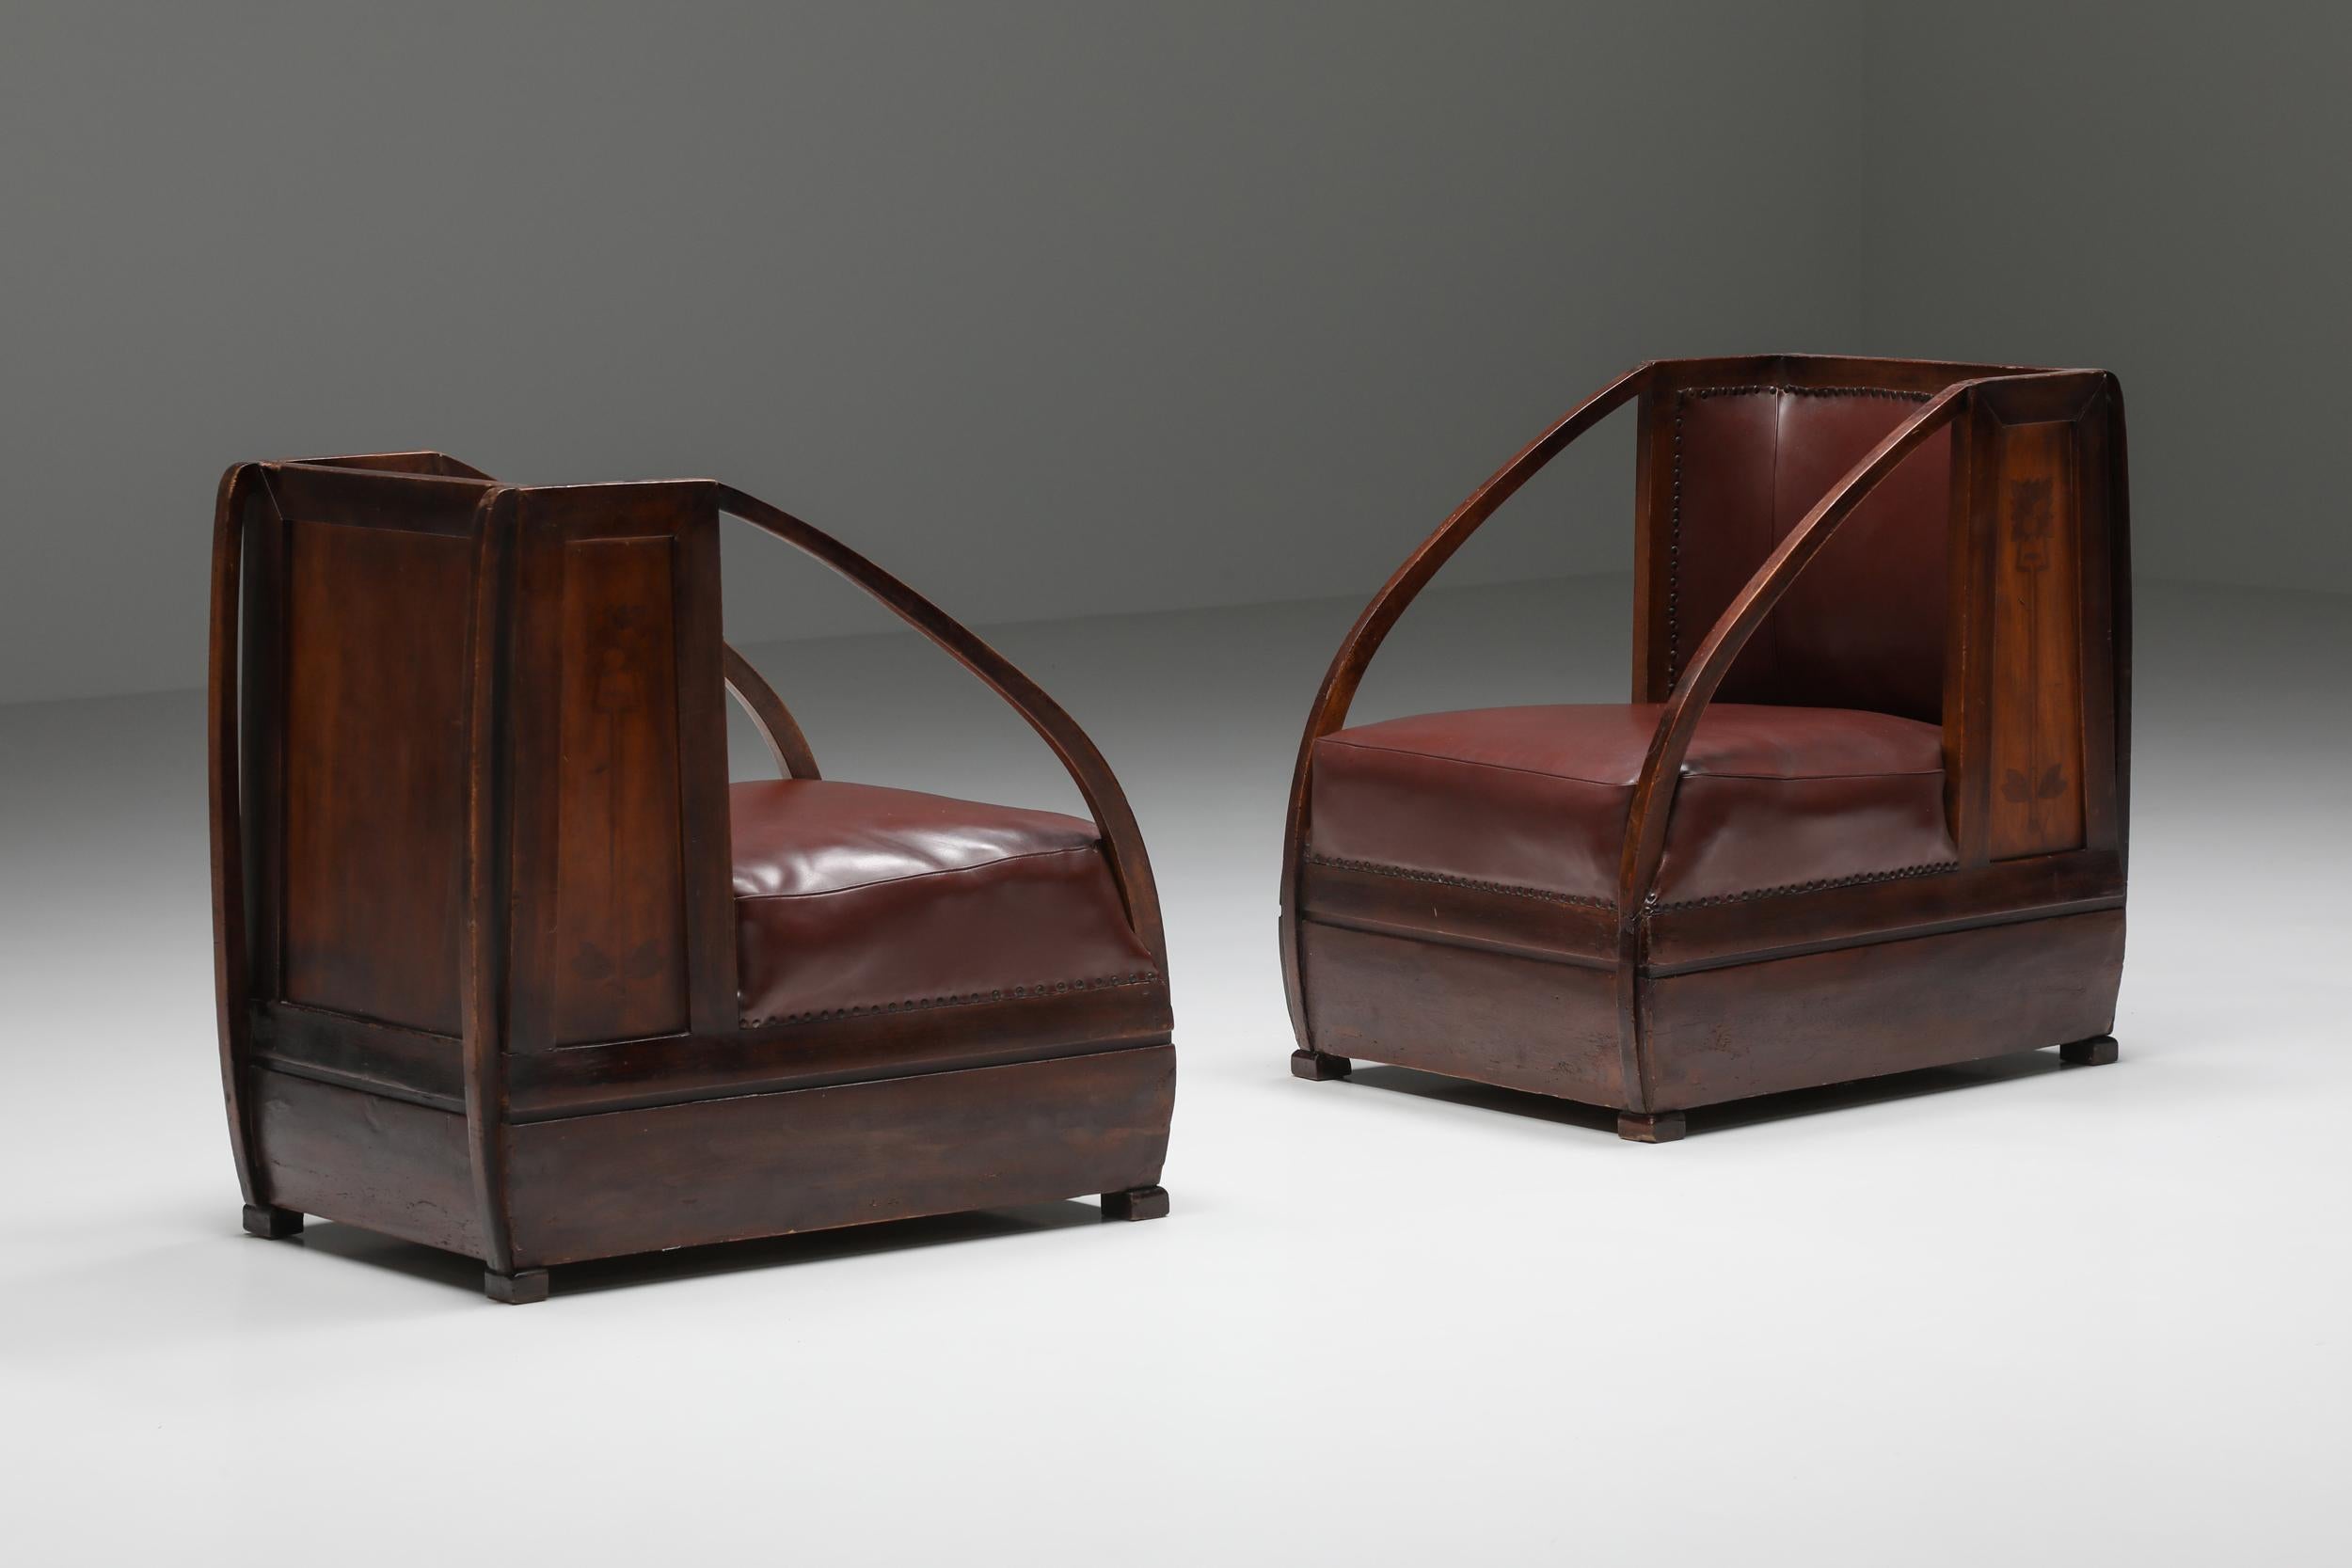 Italian Art Nouveau Carlo and Piero Zen Pair of Armchairs, Fruitwood, Mahogany, 1910 For Sale